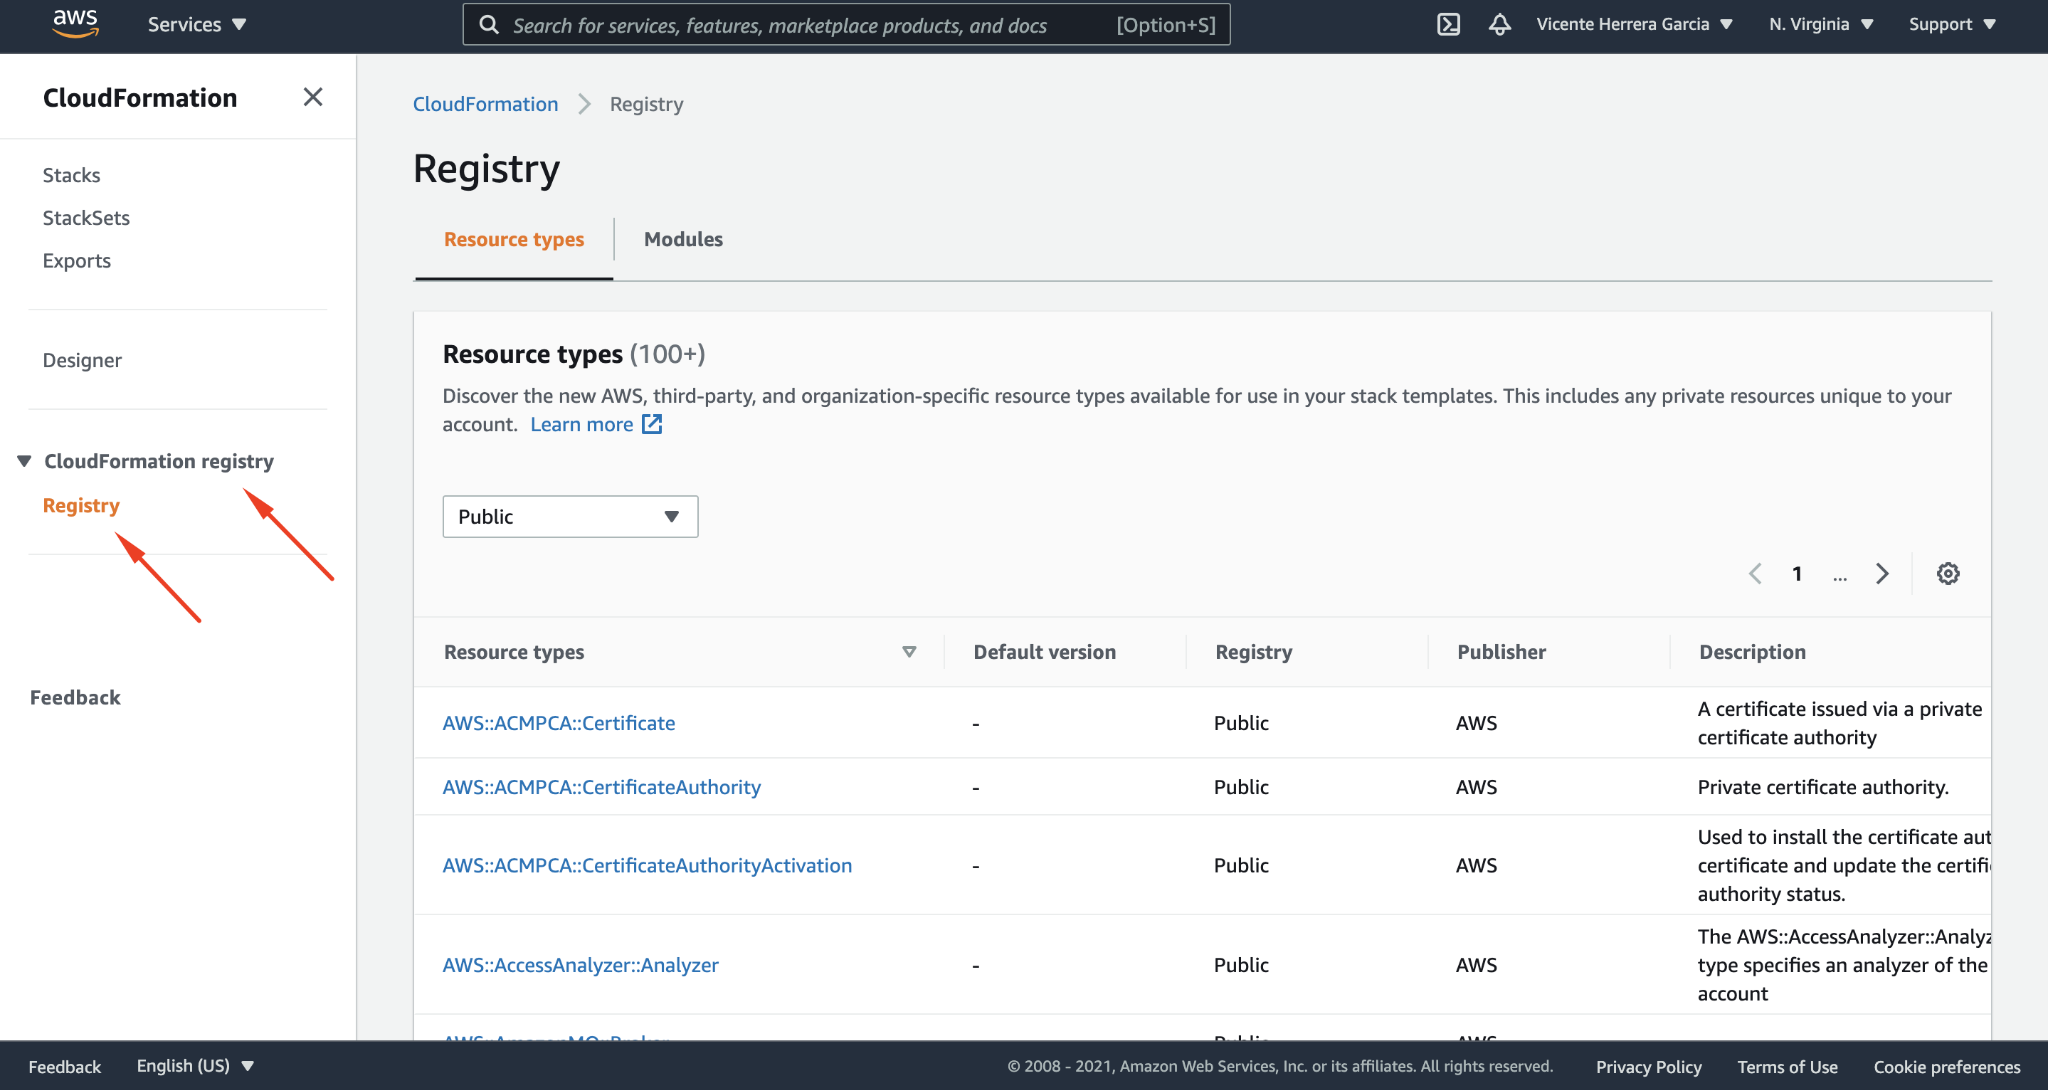 Accessing extensions from the AWS public cloud registry